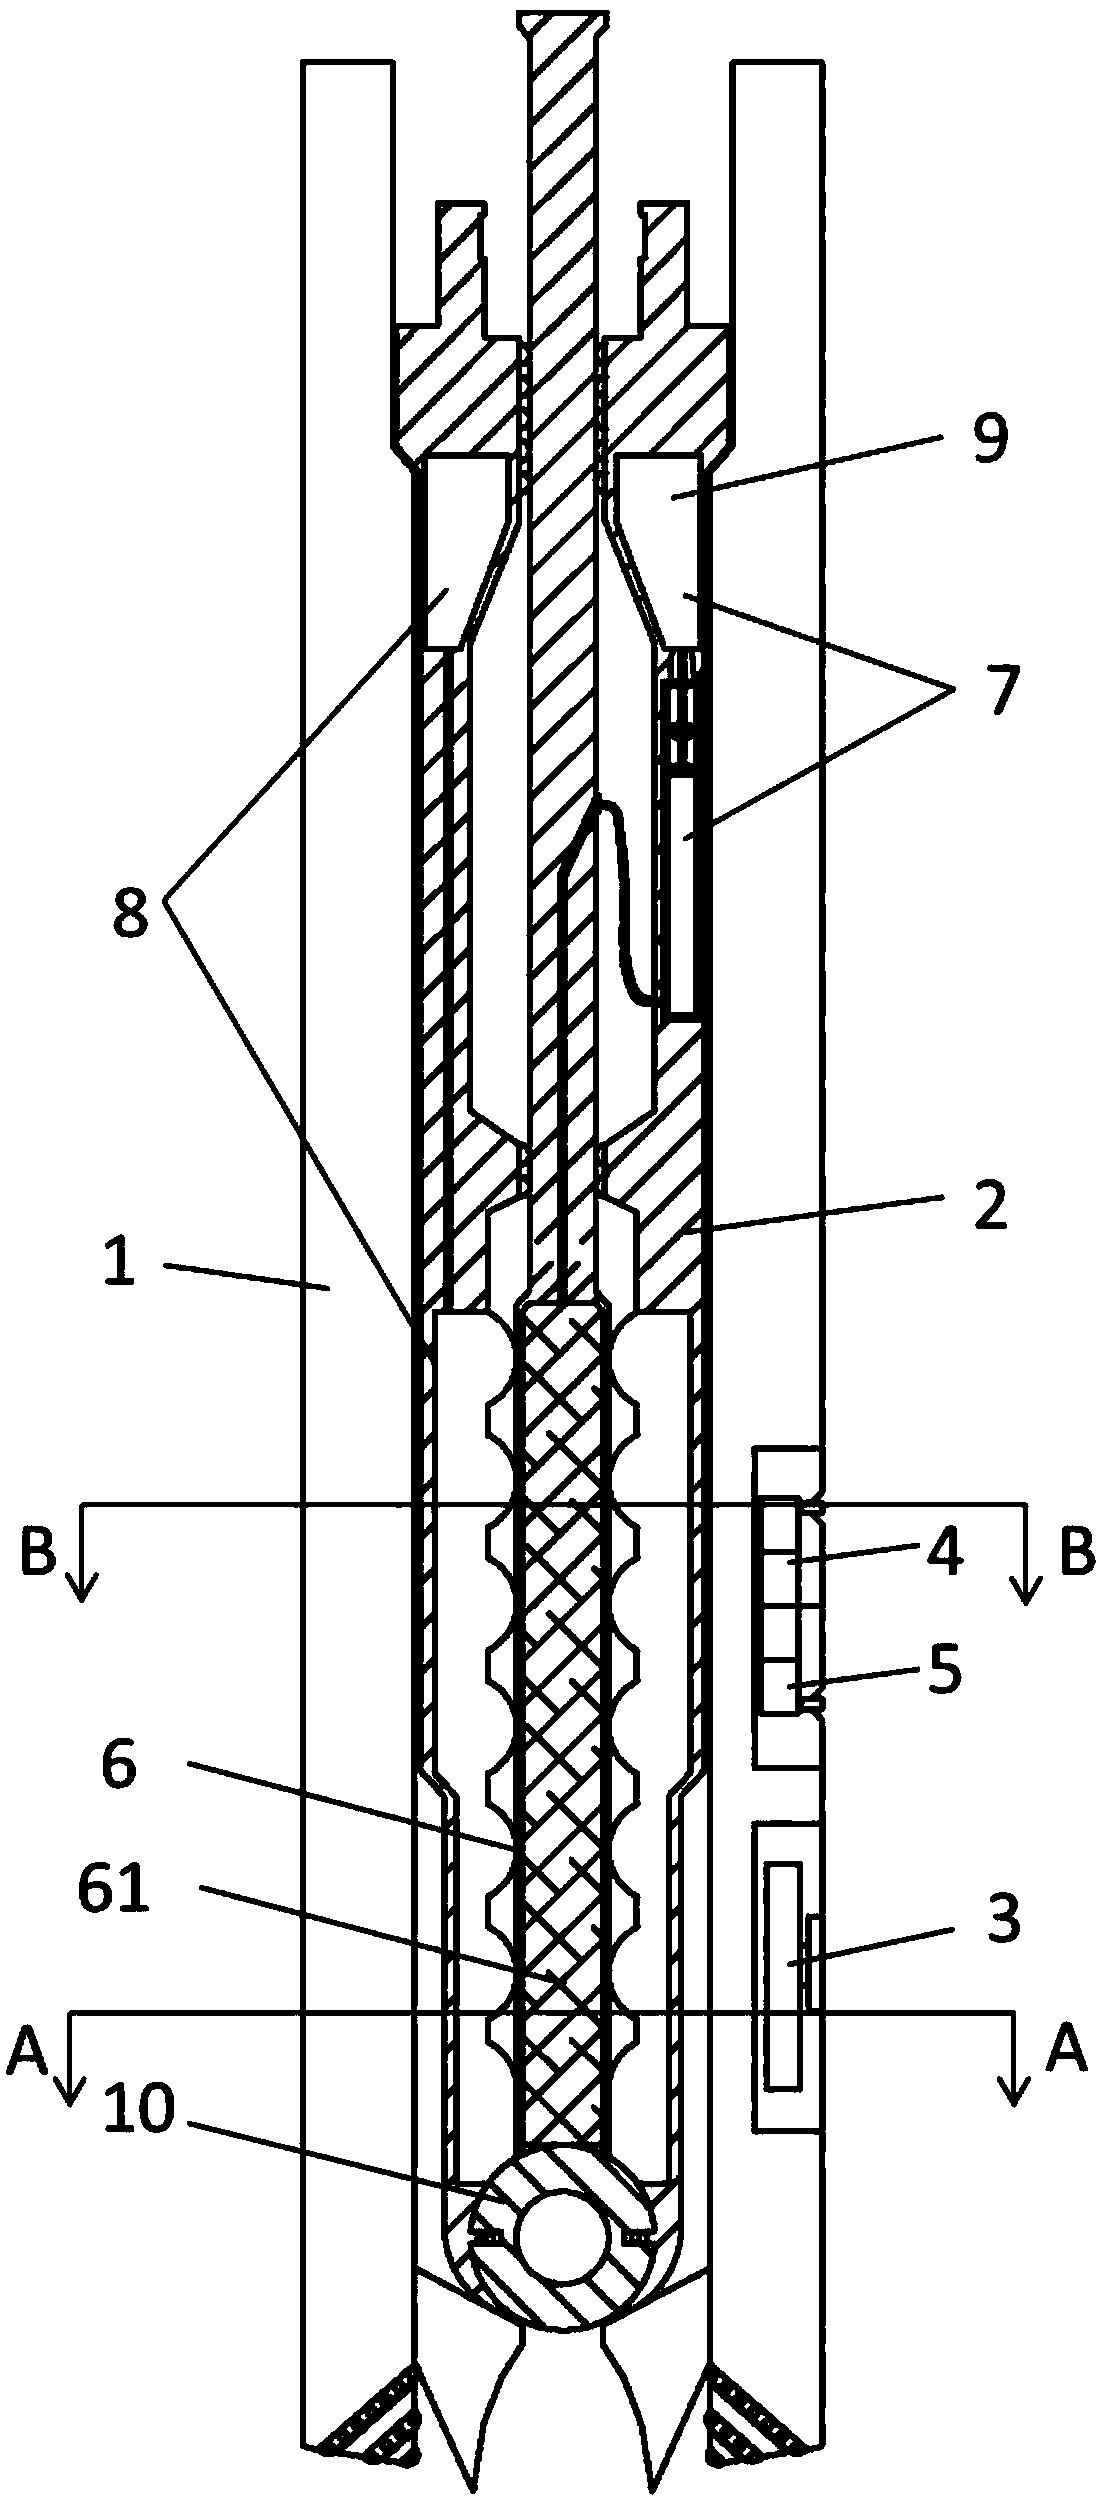 In-situ fidelity coring system and coring method